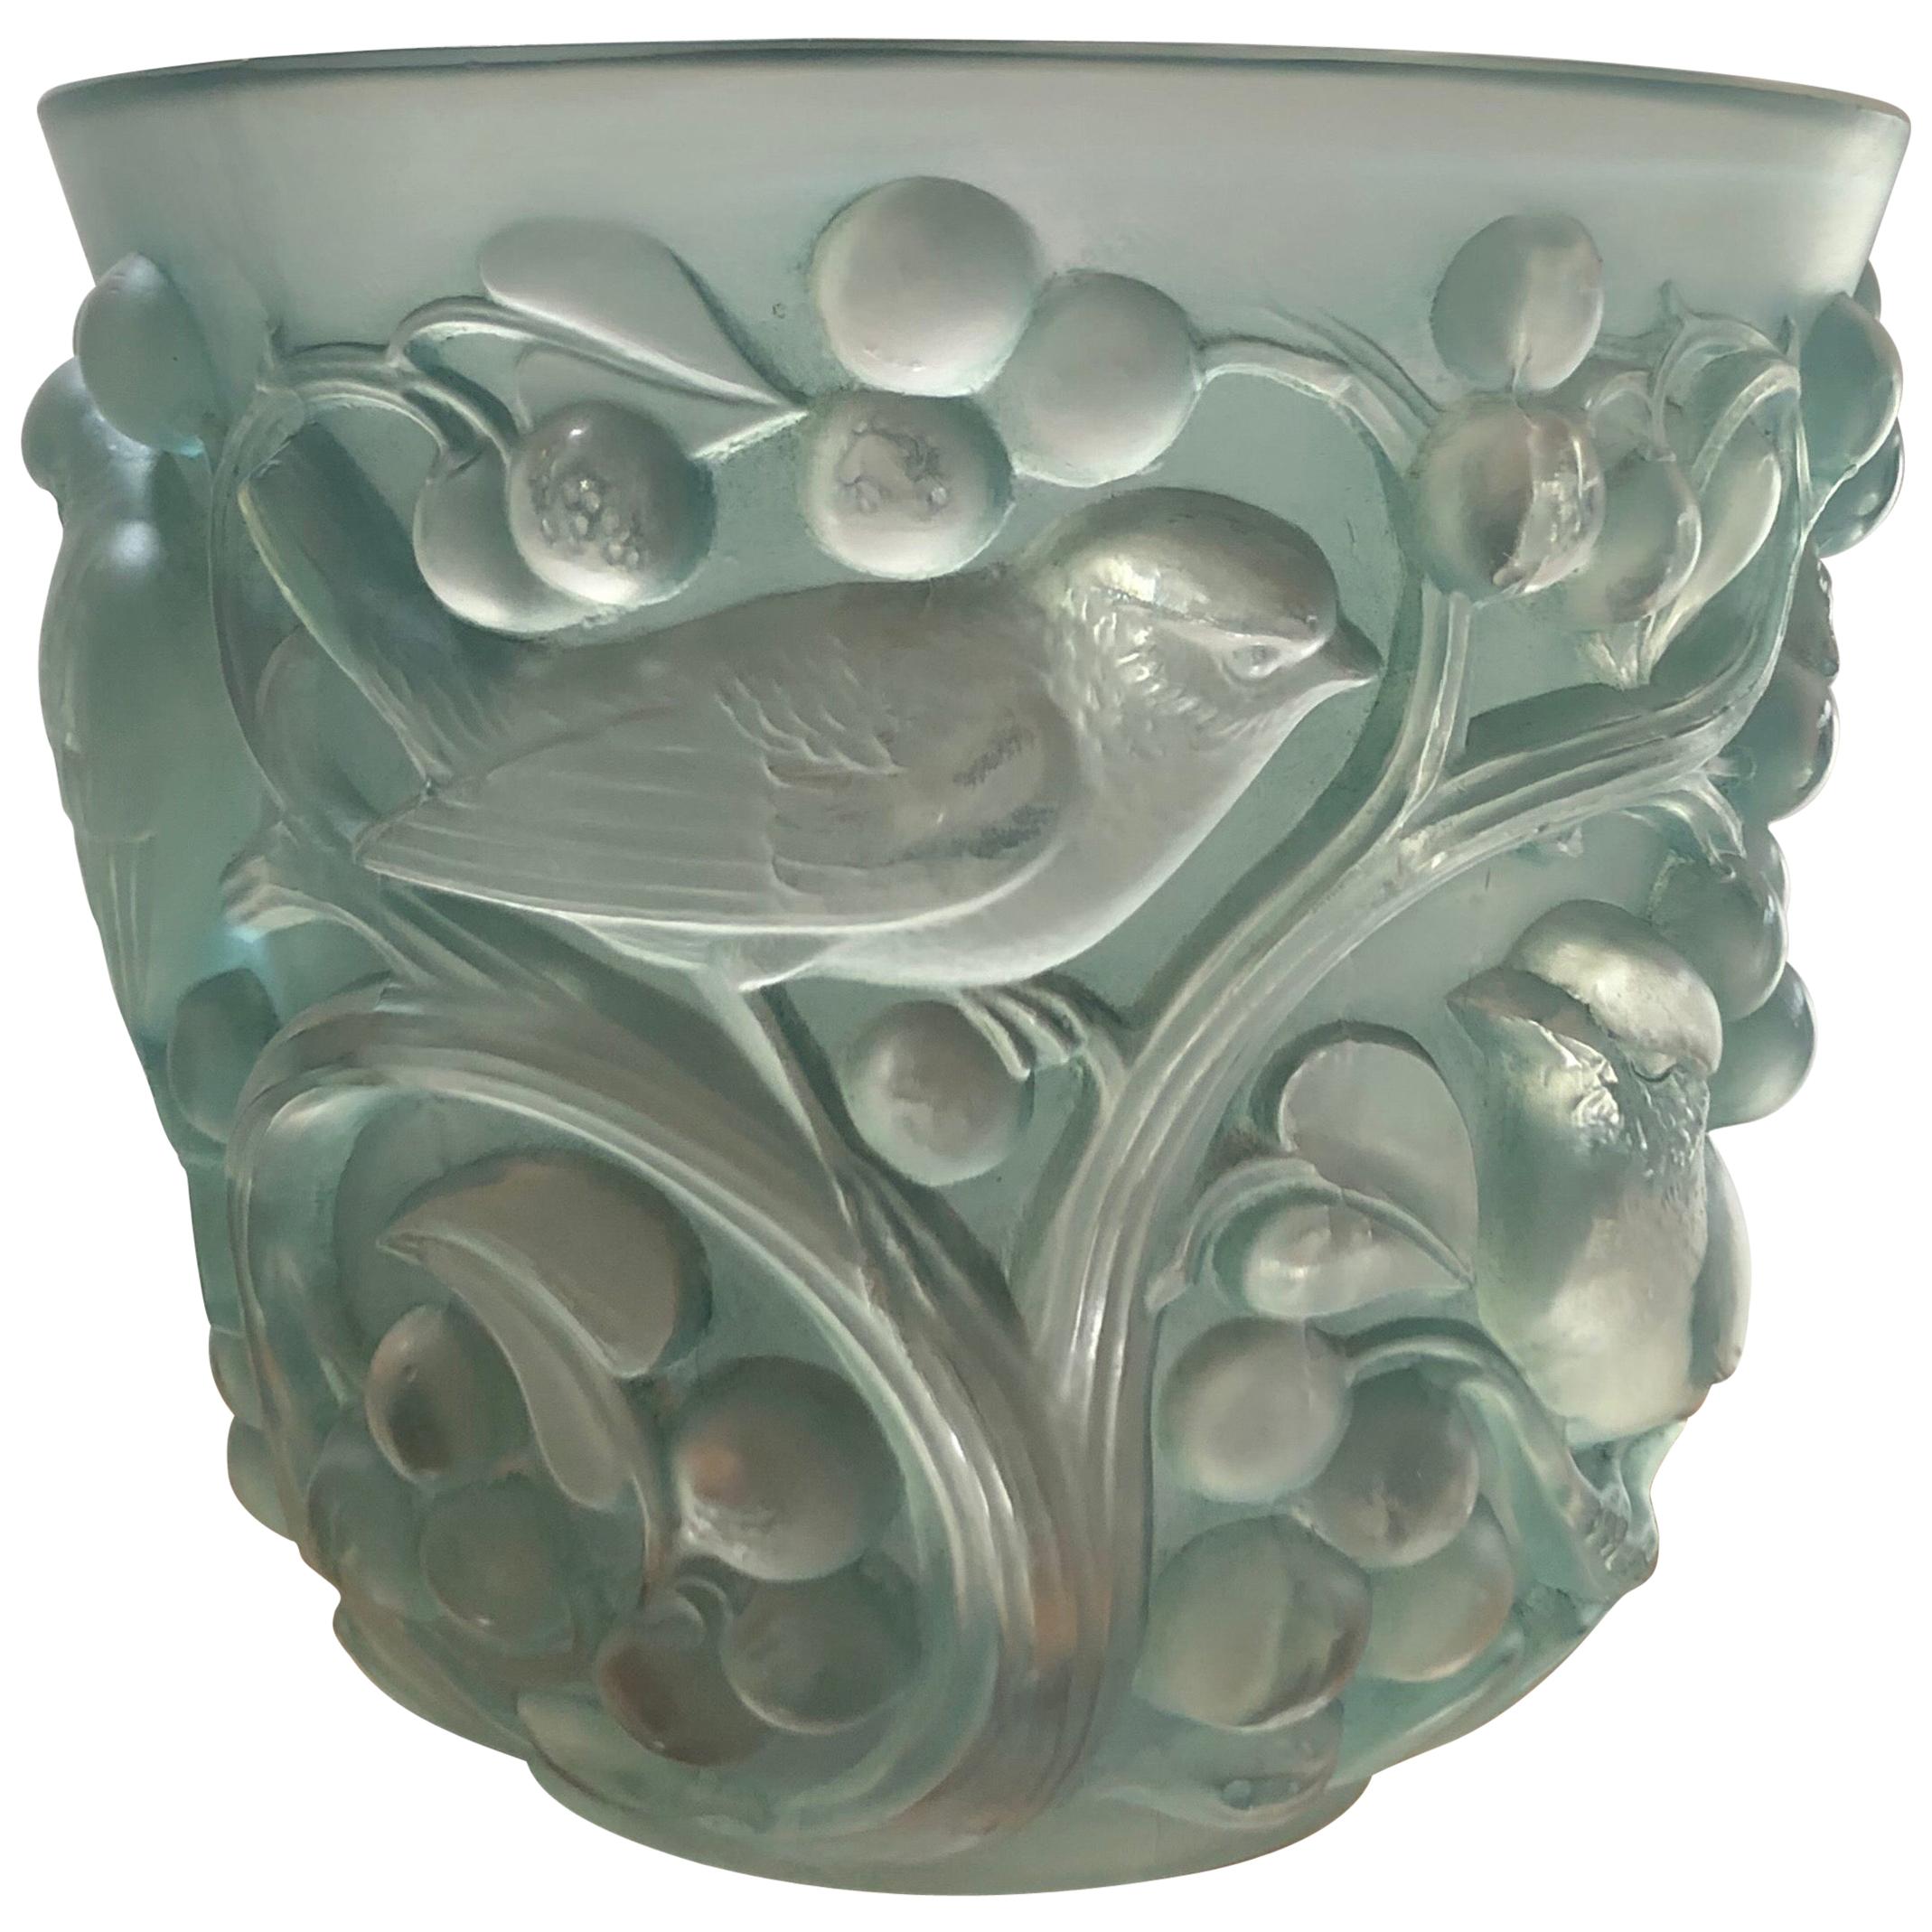 1927 René Lalique Avallon Vase in Frosted and Green Stained Glass - Sparrow Bird